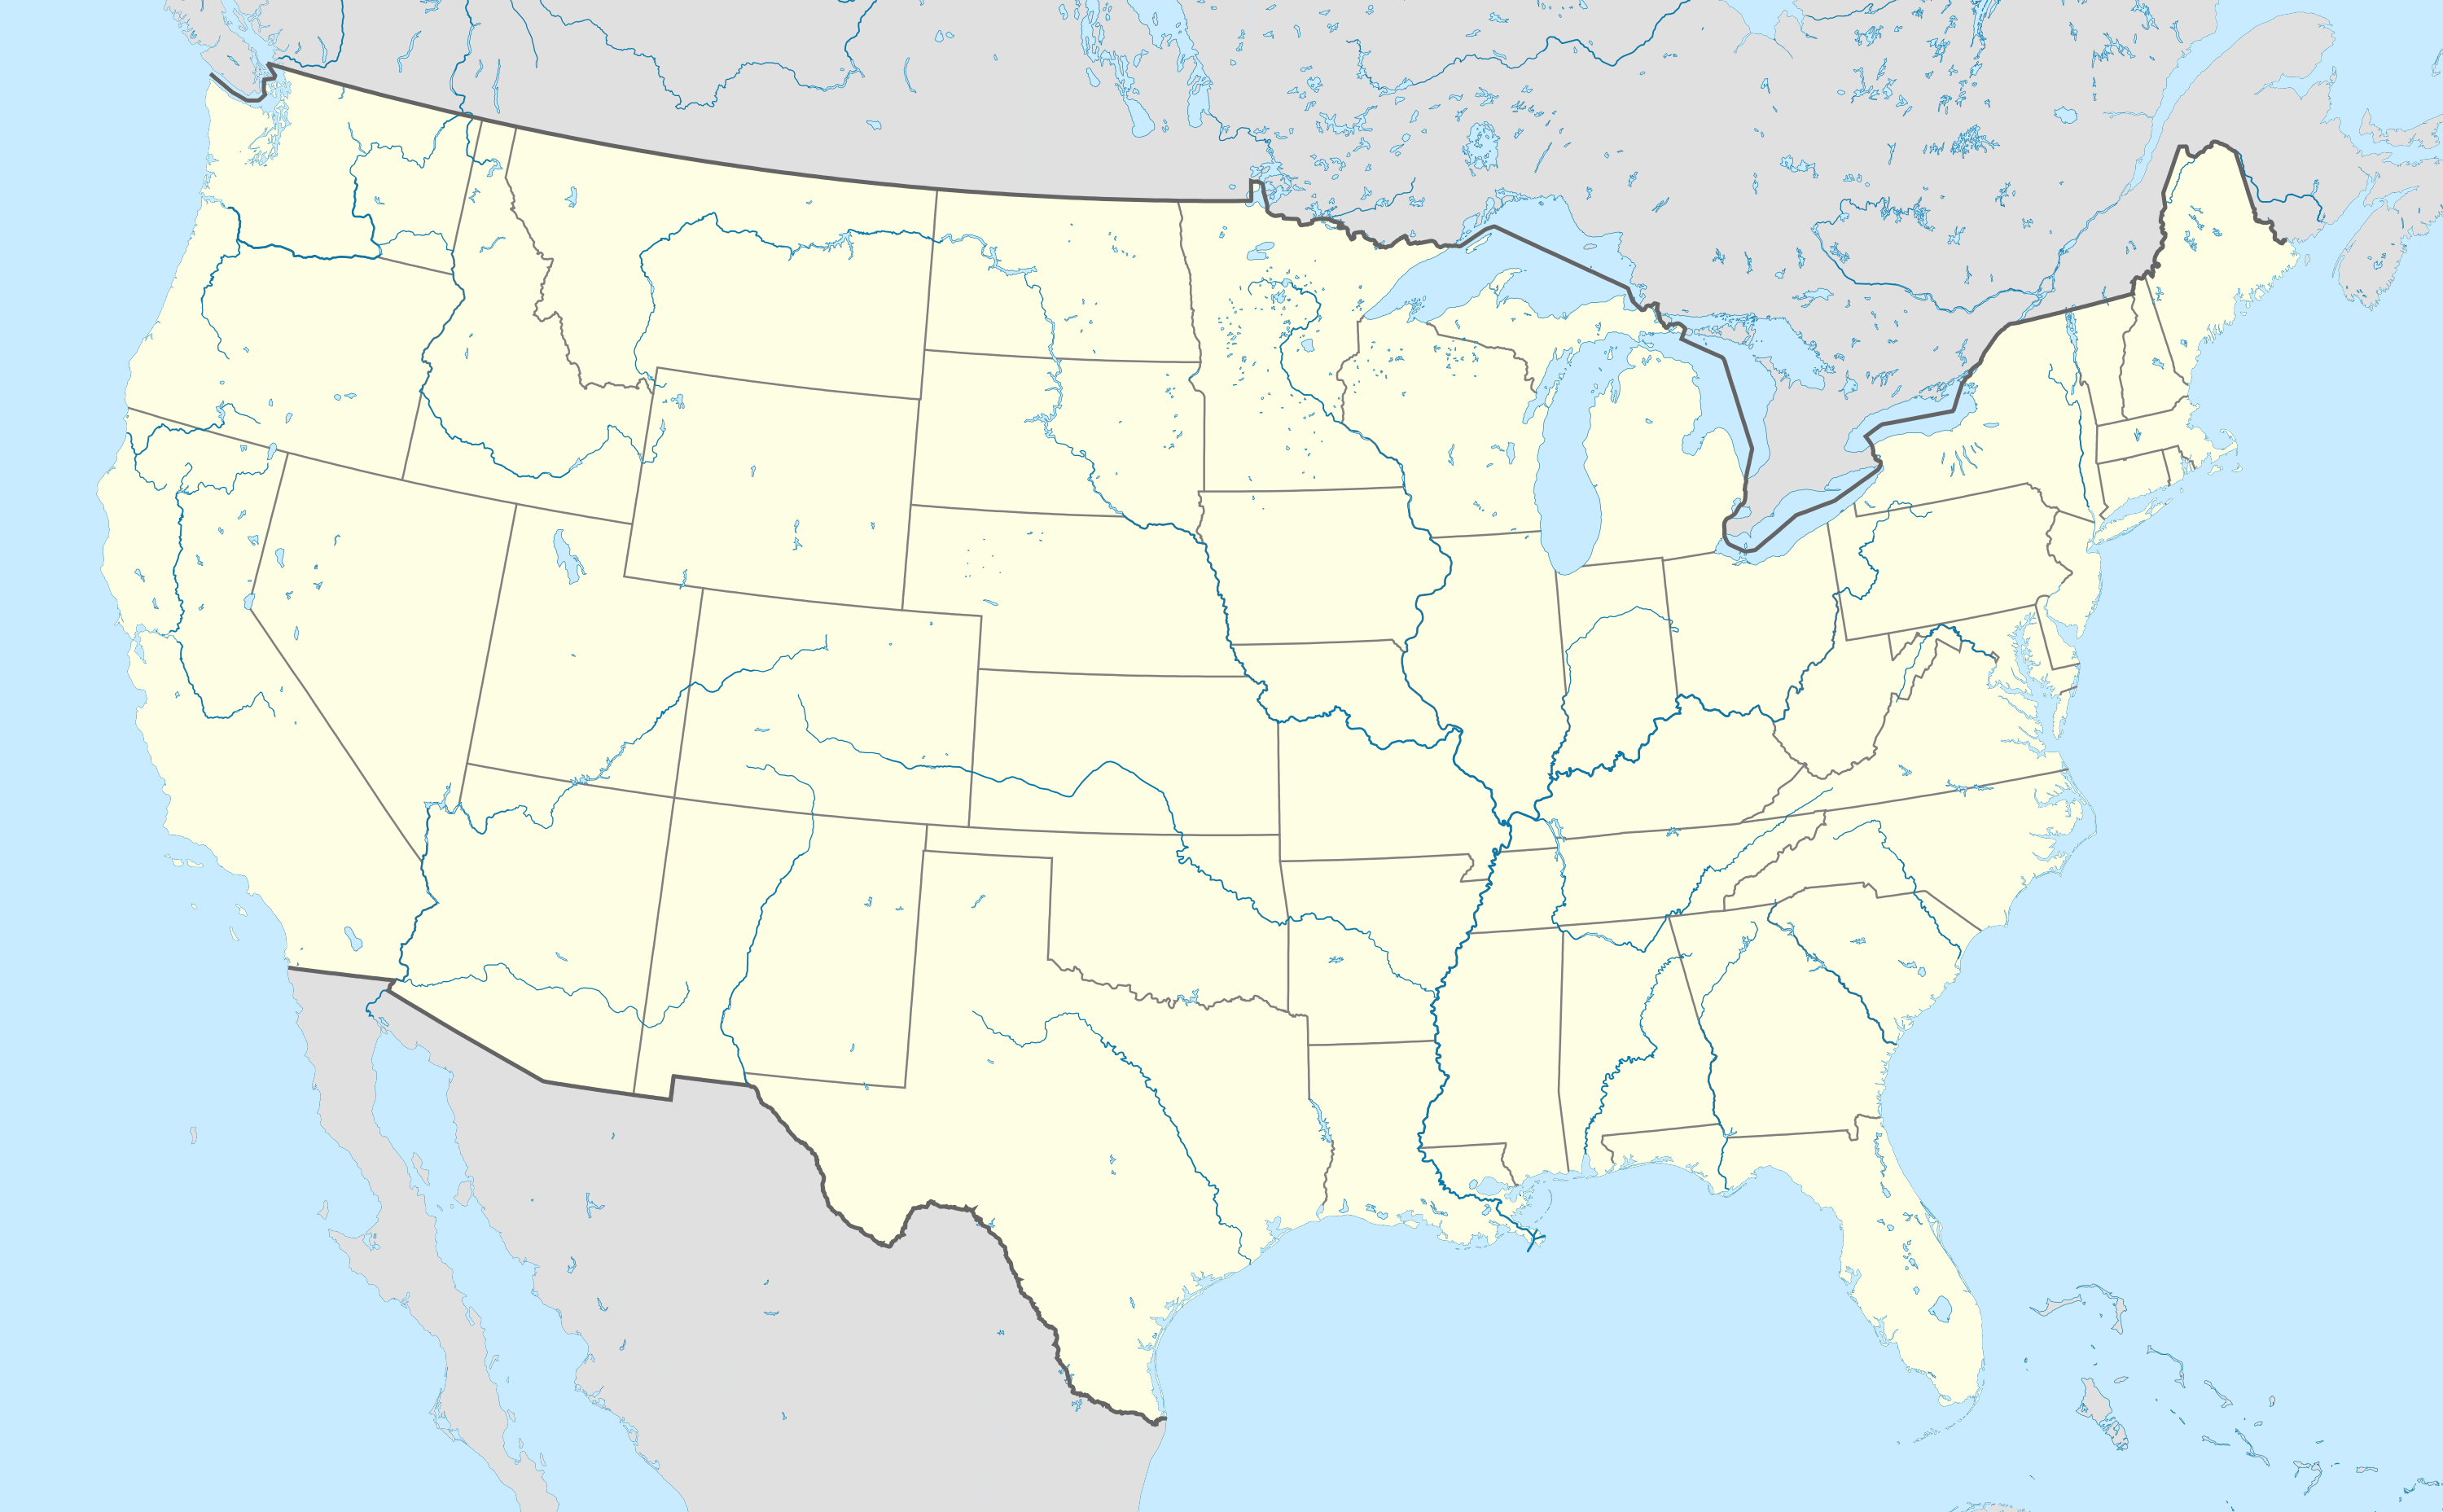 Minor League Baseball is located in the United States